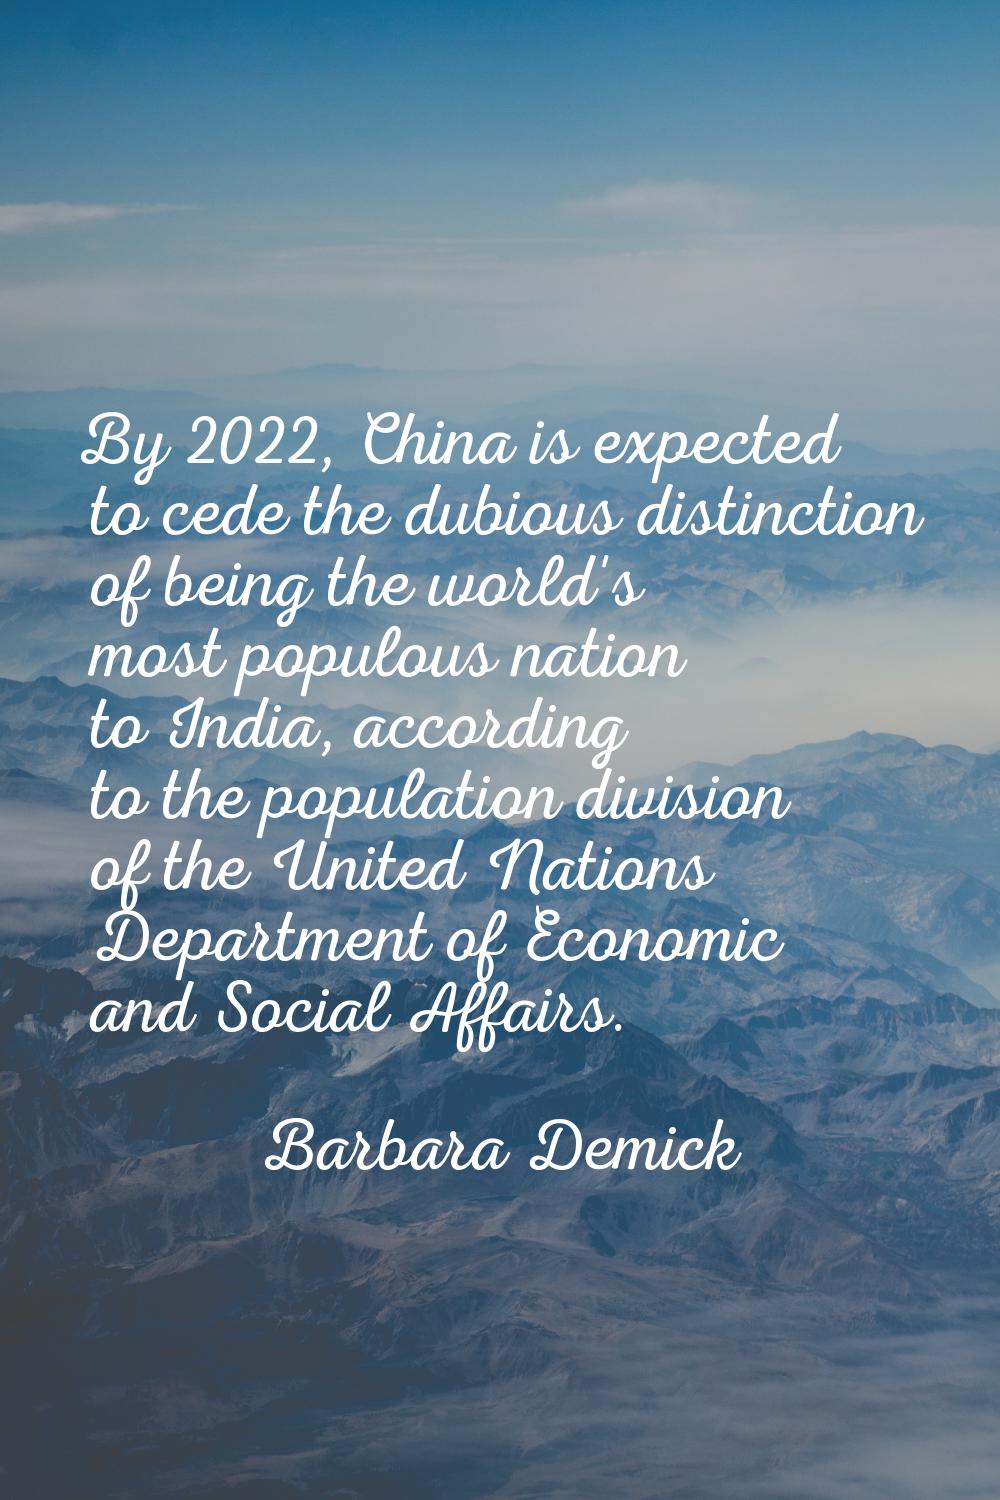 By 2022, China is expected to cede the dubious distinction of being the world's most populous natio